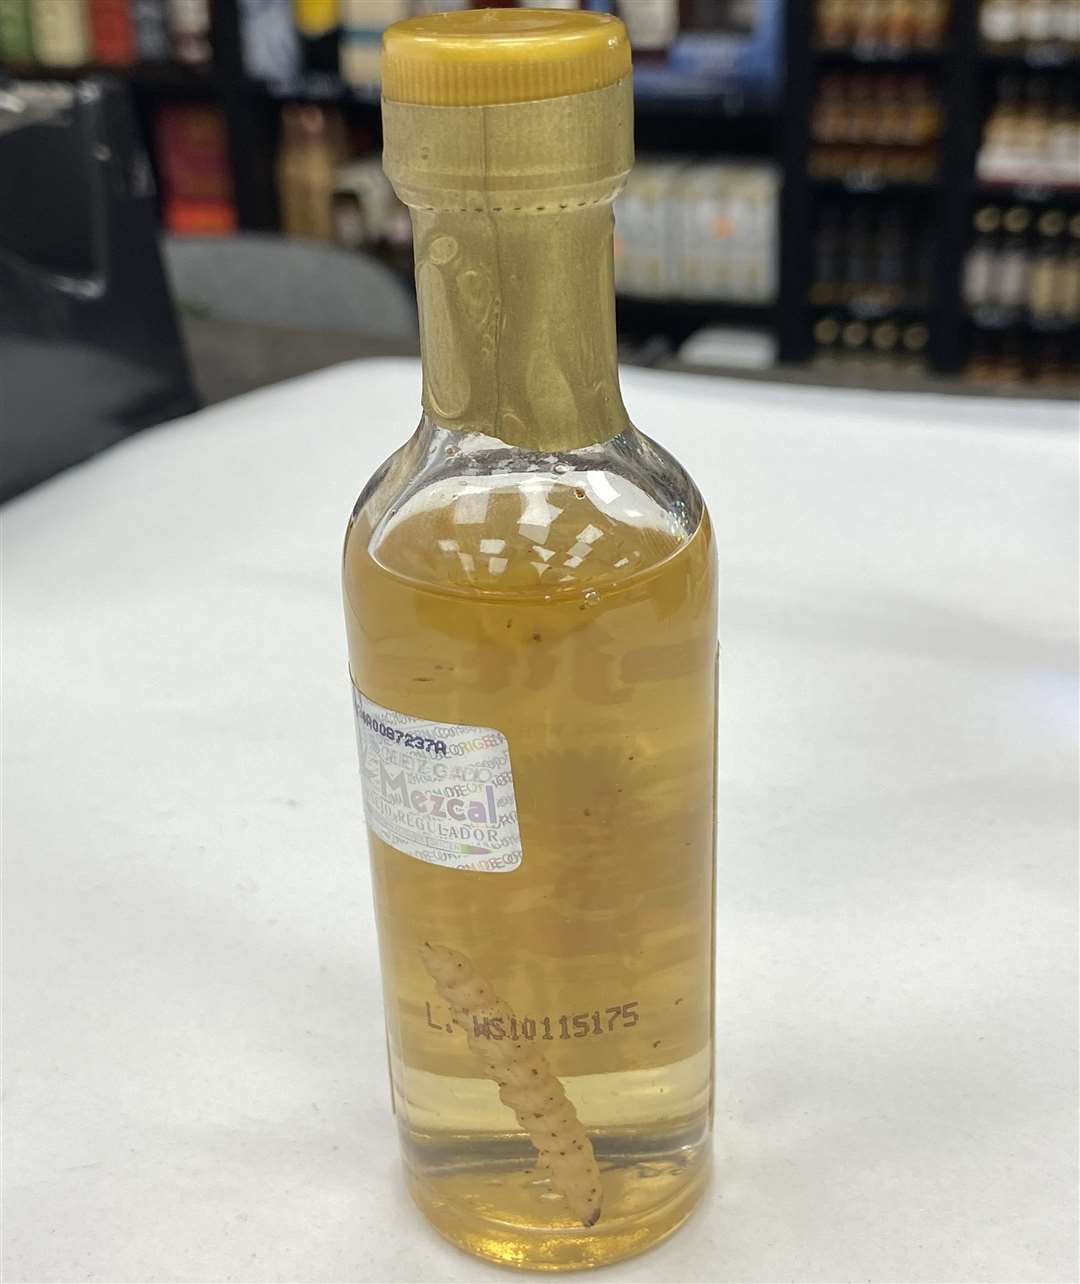 The Mezcal Lajita tequila miniature has a traditional agave worm inside